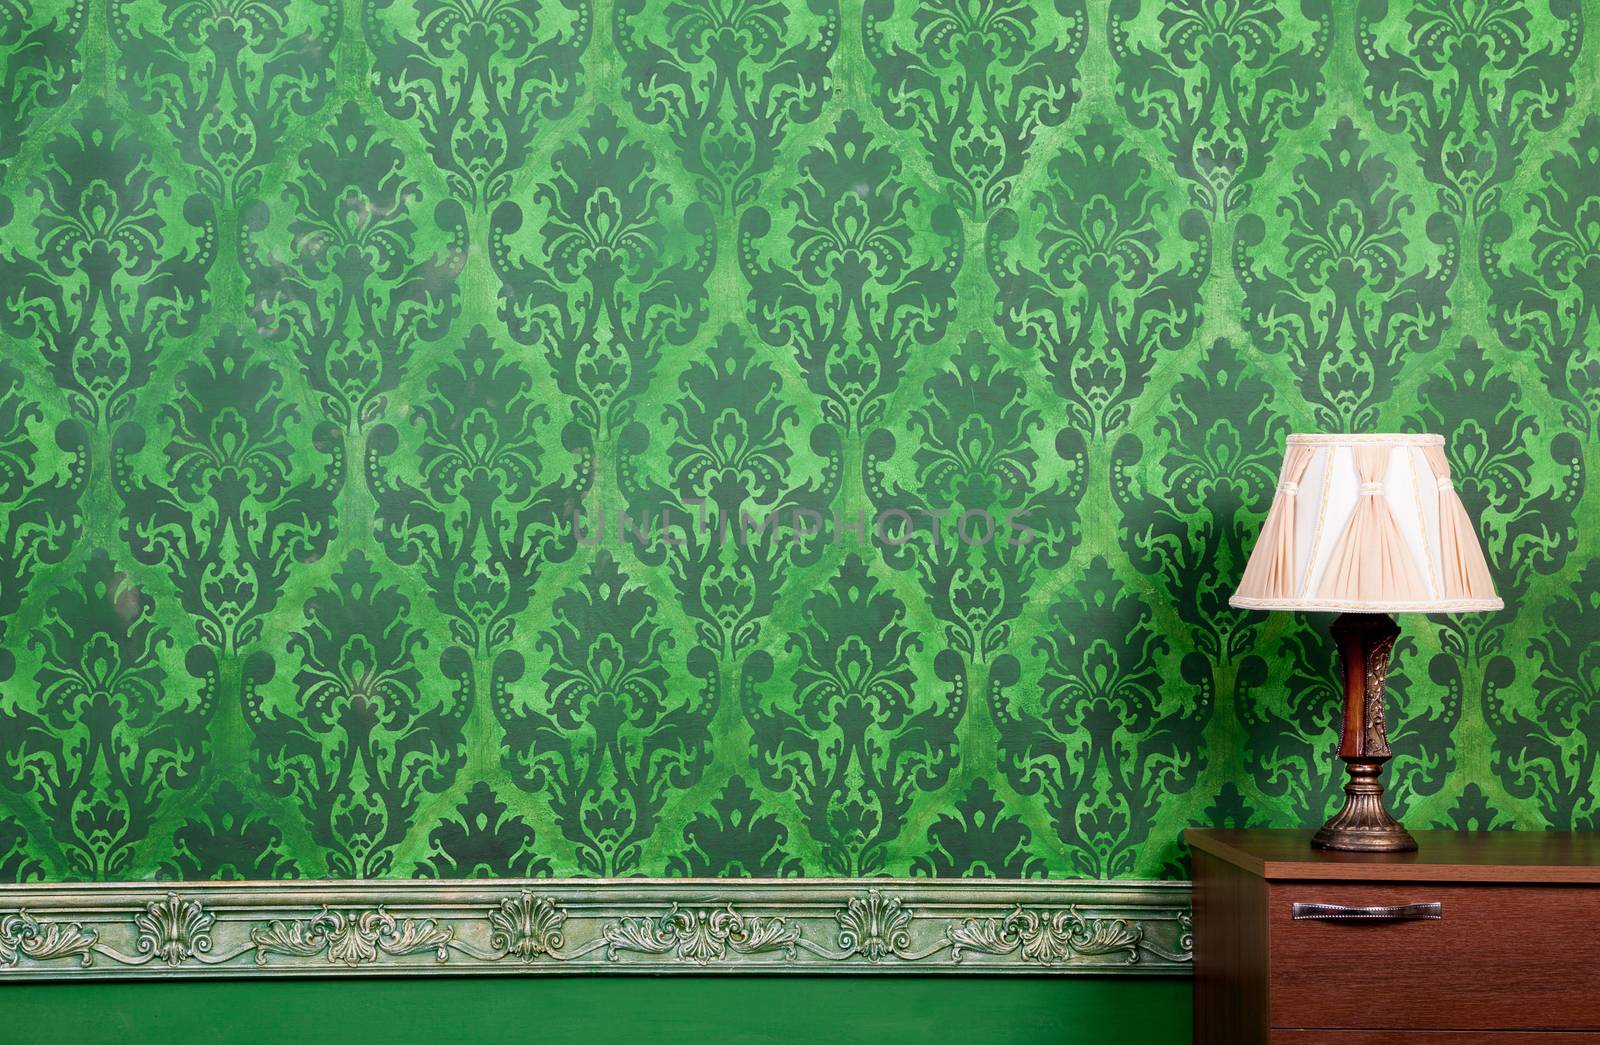 Lamp in vintage green interior with rococo pattern wall